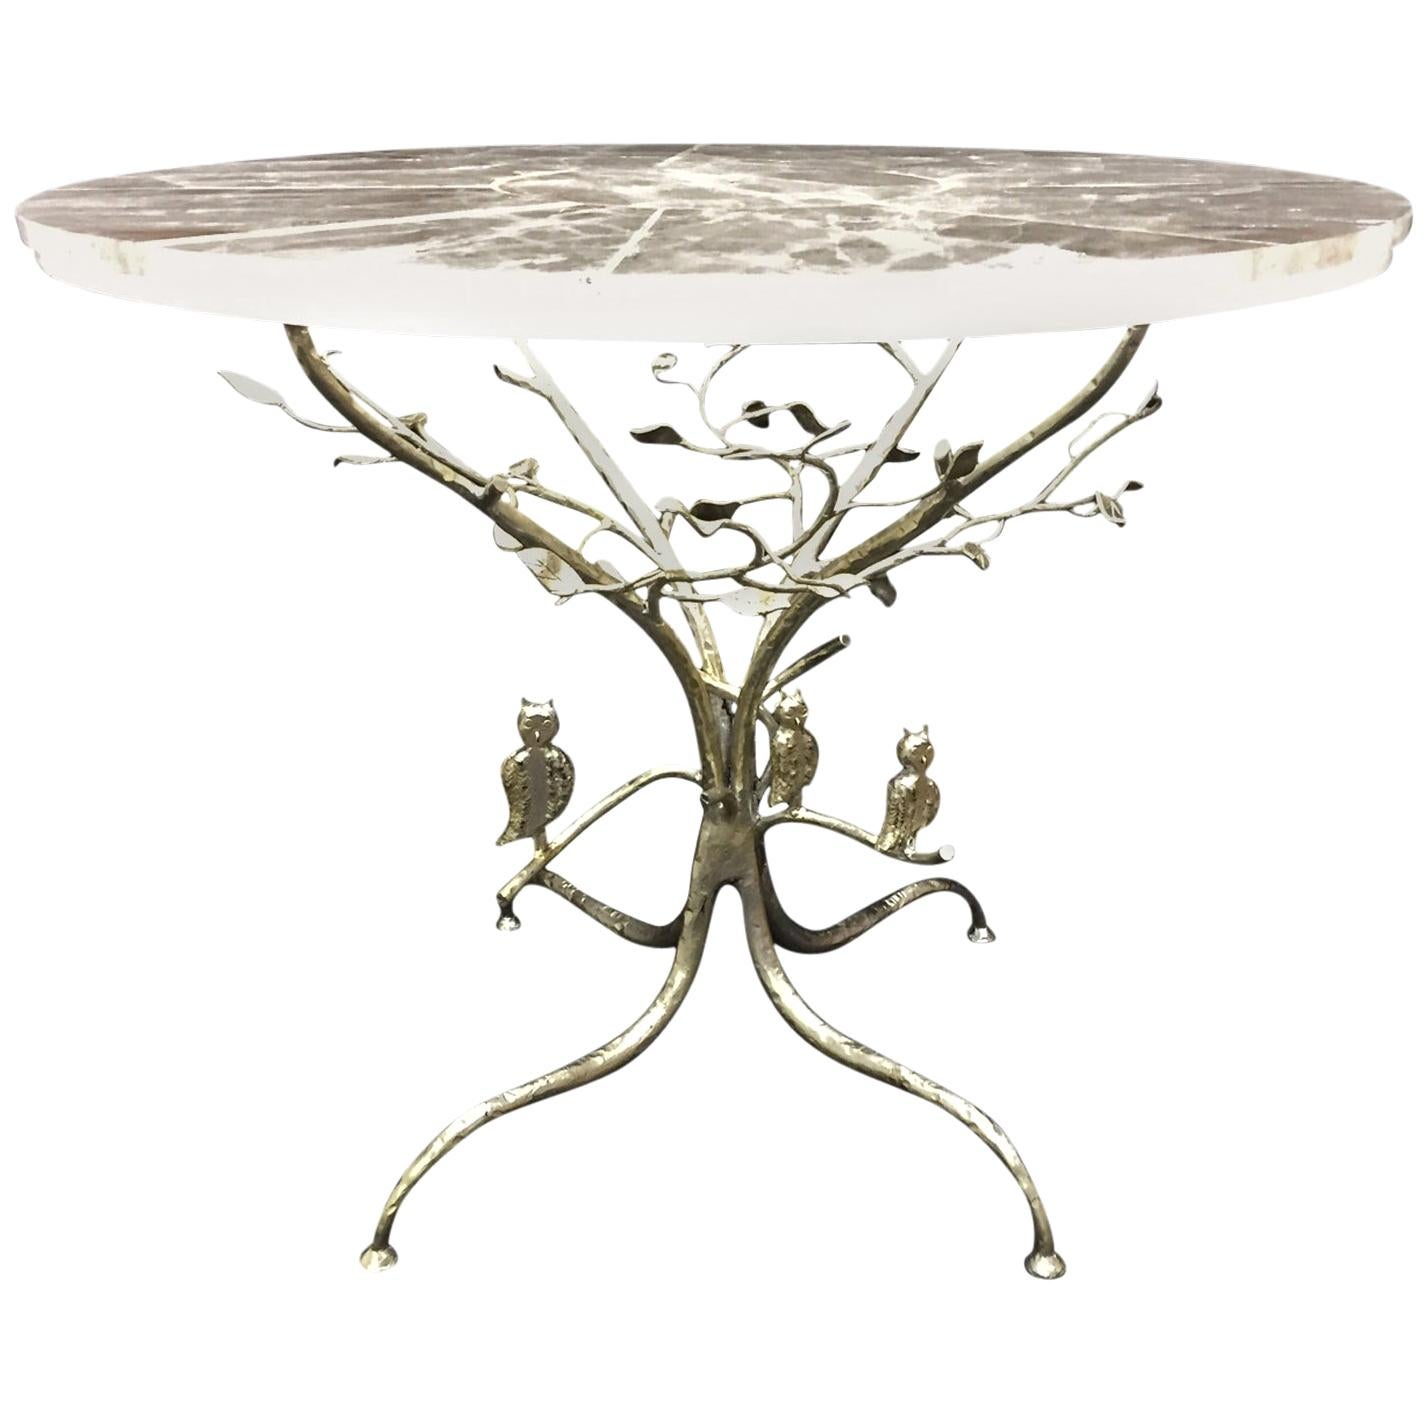 Modern Rock Crystal Table on Hand Forged Silver-Leafed Iron Base, One of a Kind